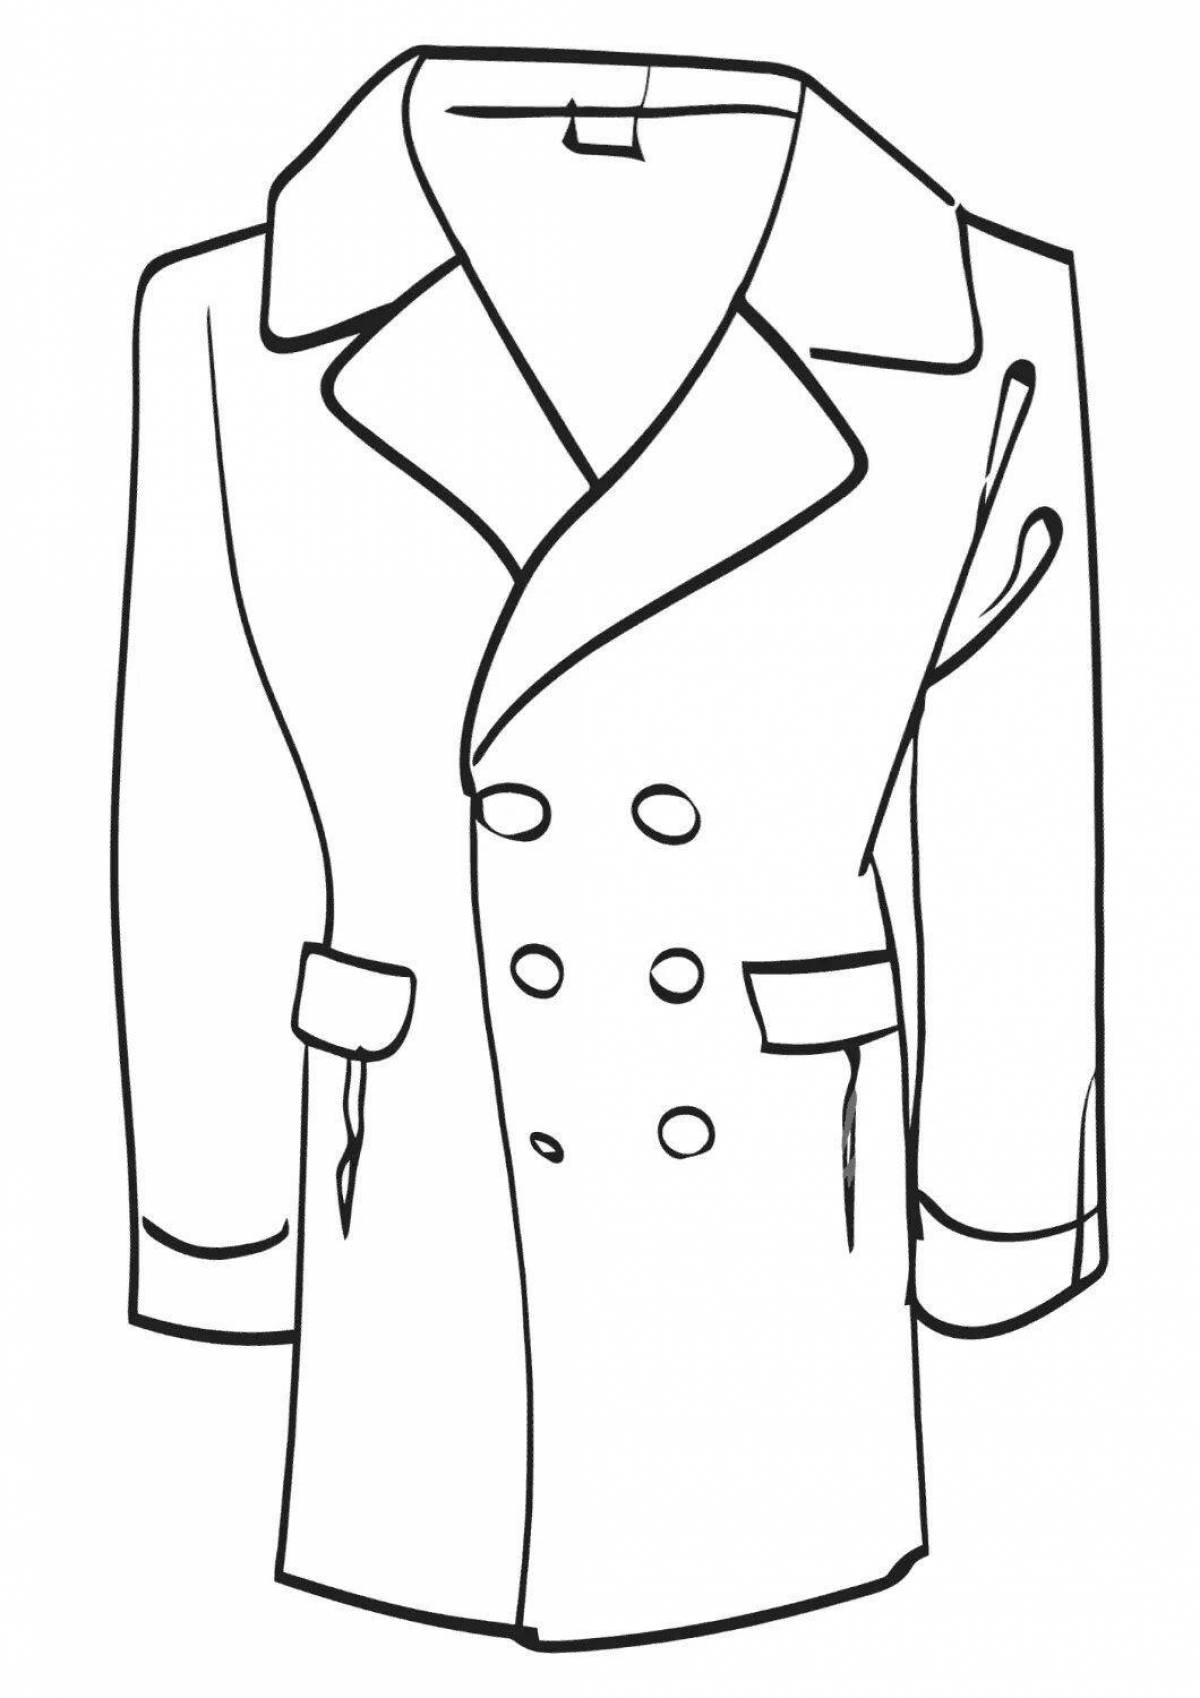 Gorgeous outerwear coloring page